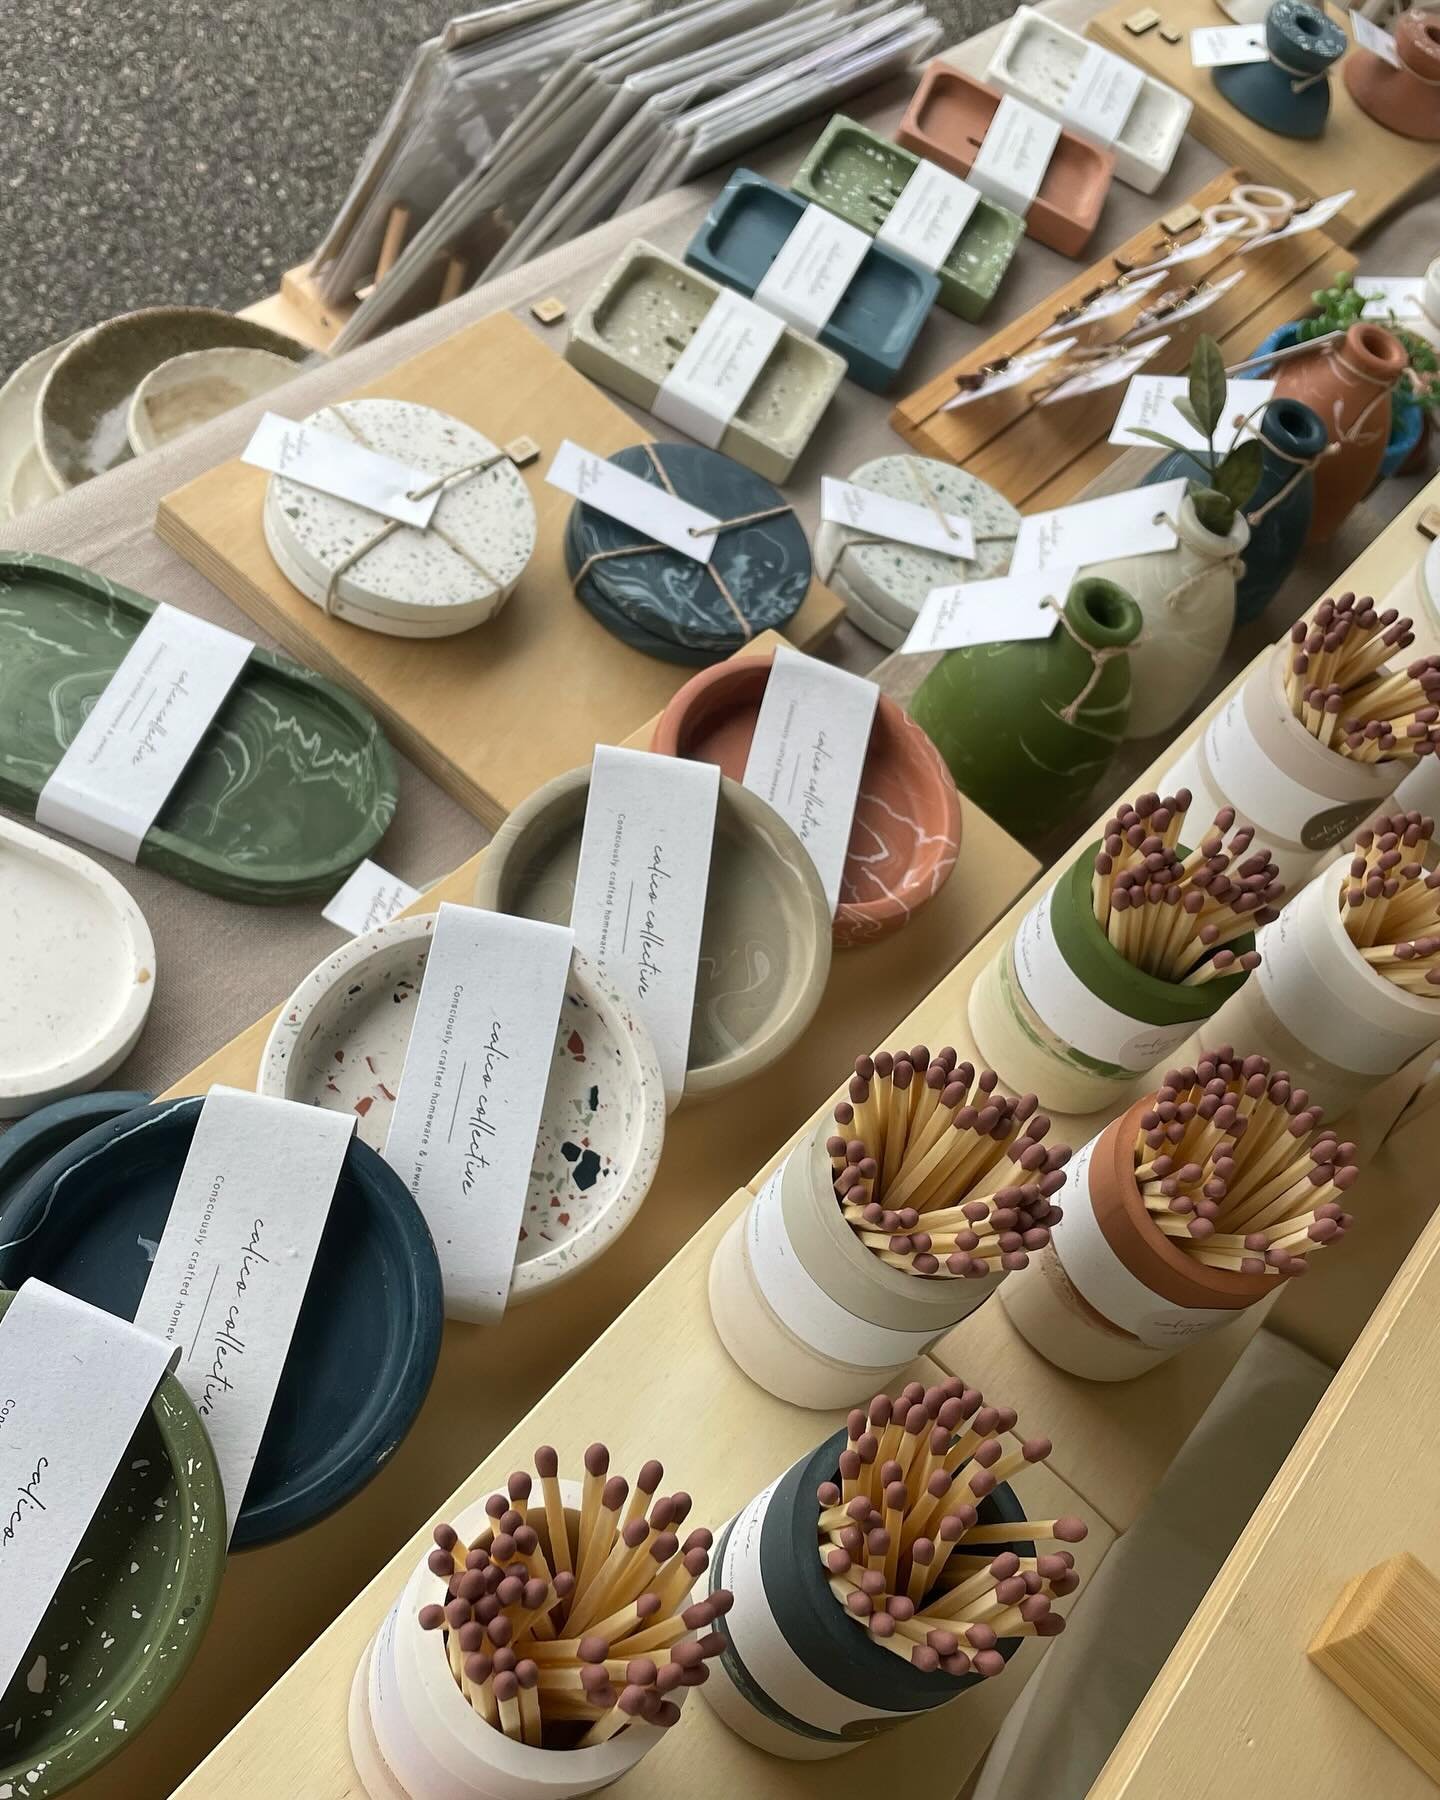 Morning West Didsbury 🌱

You can find me back in the Withington Community Hospital car park with @_makersmarket today until 4pm!

Plenty of homeware, jewellery, ceramics &amp; gift ideas plus a big selection of sale/seconds stock too 💫

&bull;
&bul